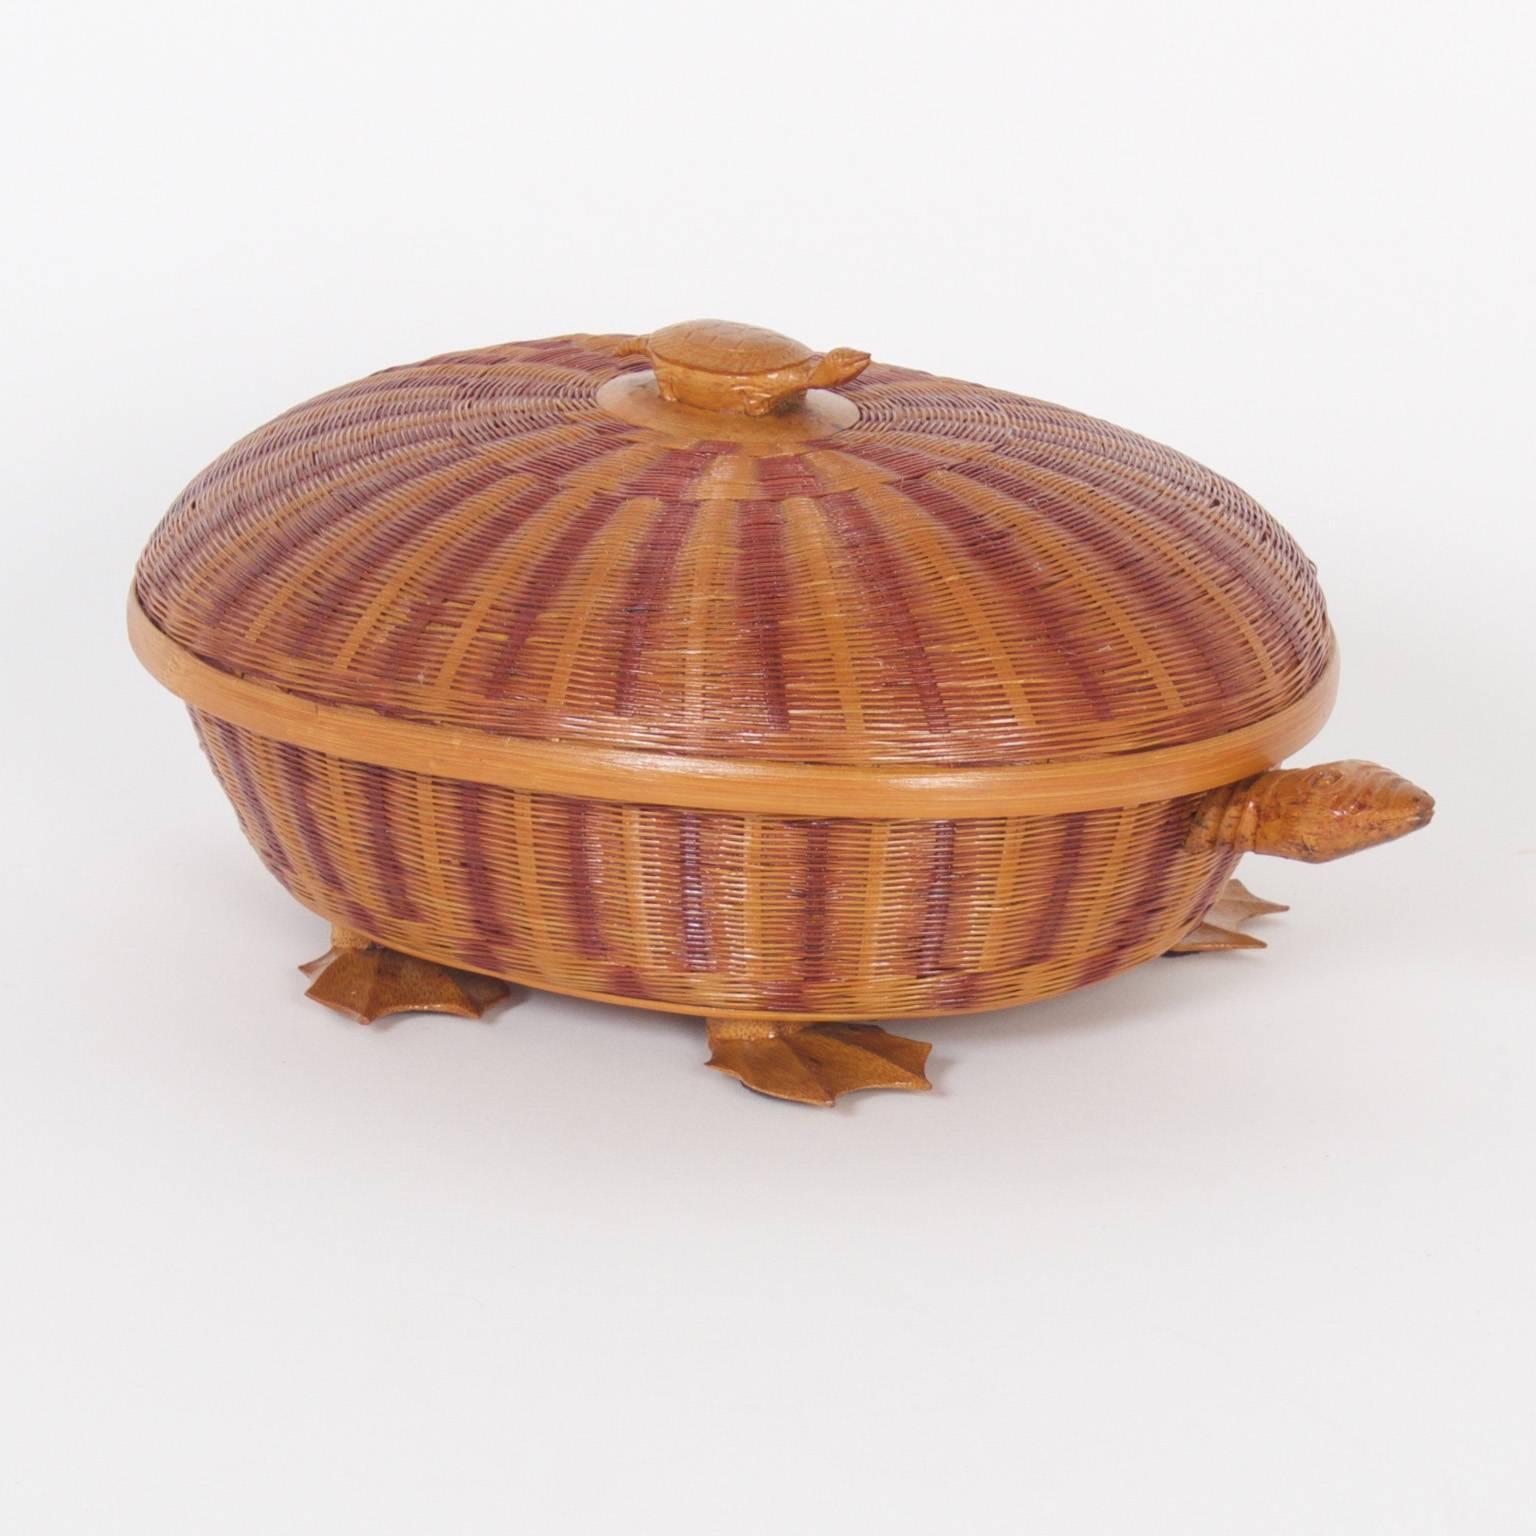 Amusing Mid-Century wicker turtle box crafted with an intricate basket type weave and having a baby turtle as a handle on top. Removing the lid reveals a surprising herring bone pattern in the interior. The head and feet are carved wood.